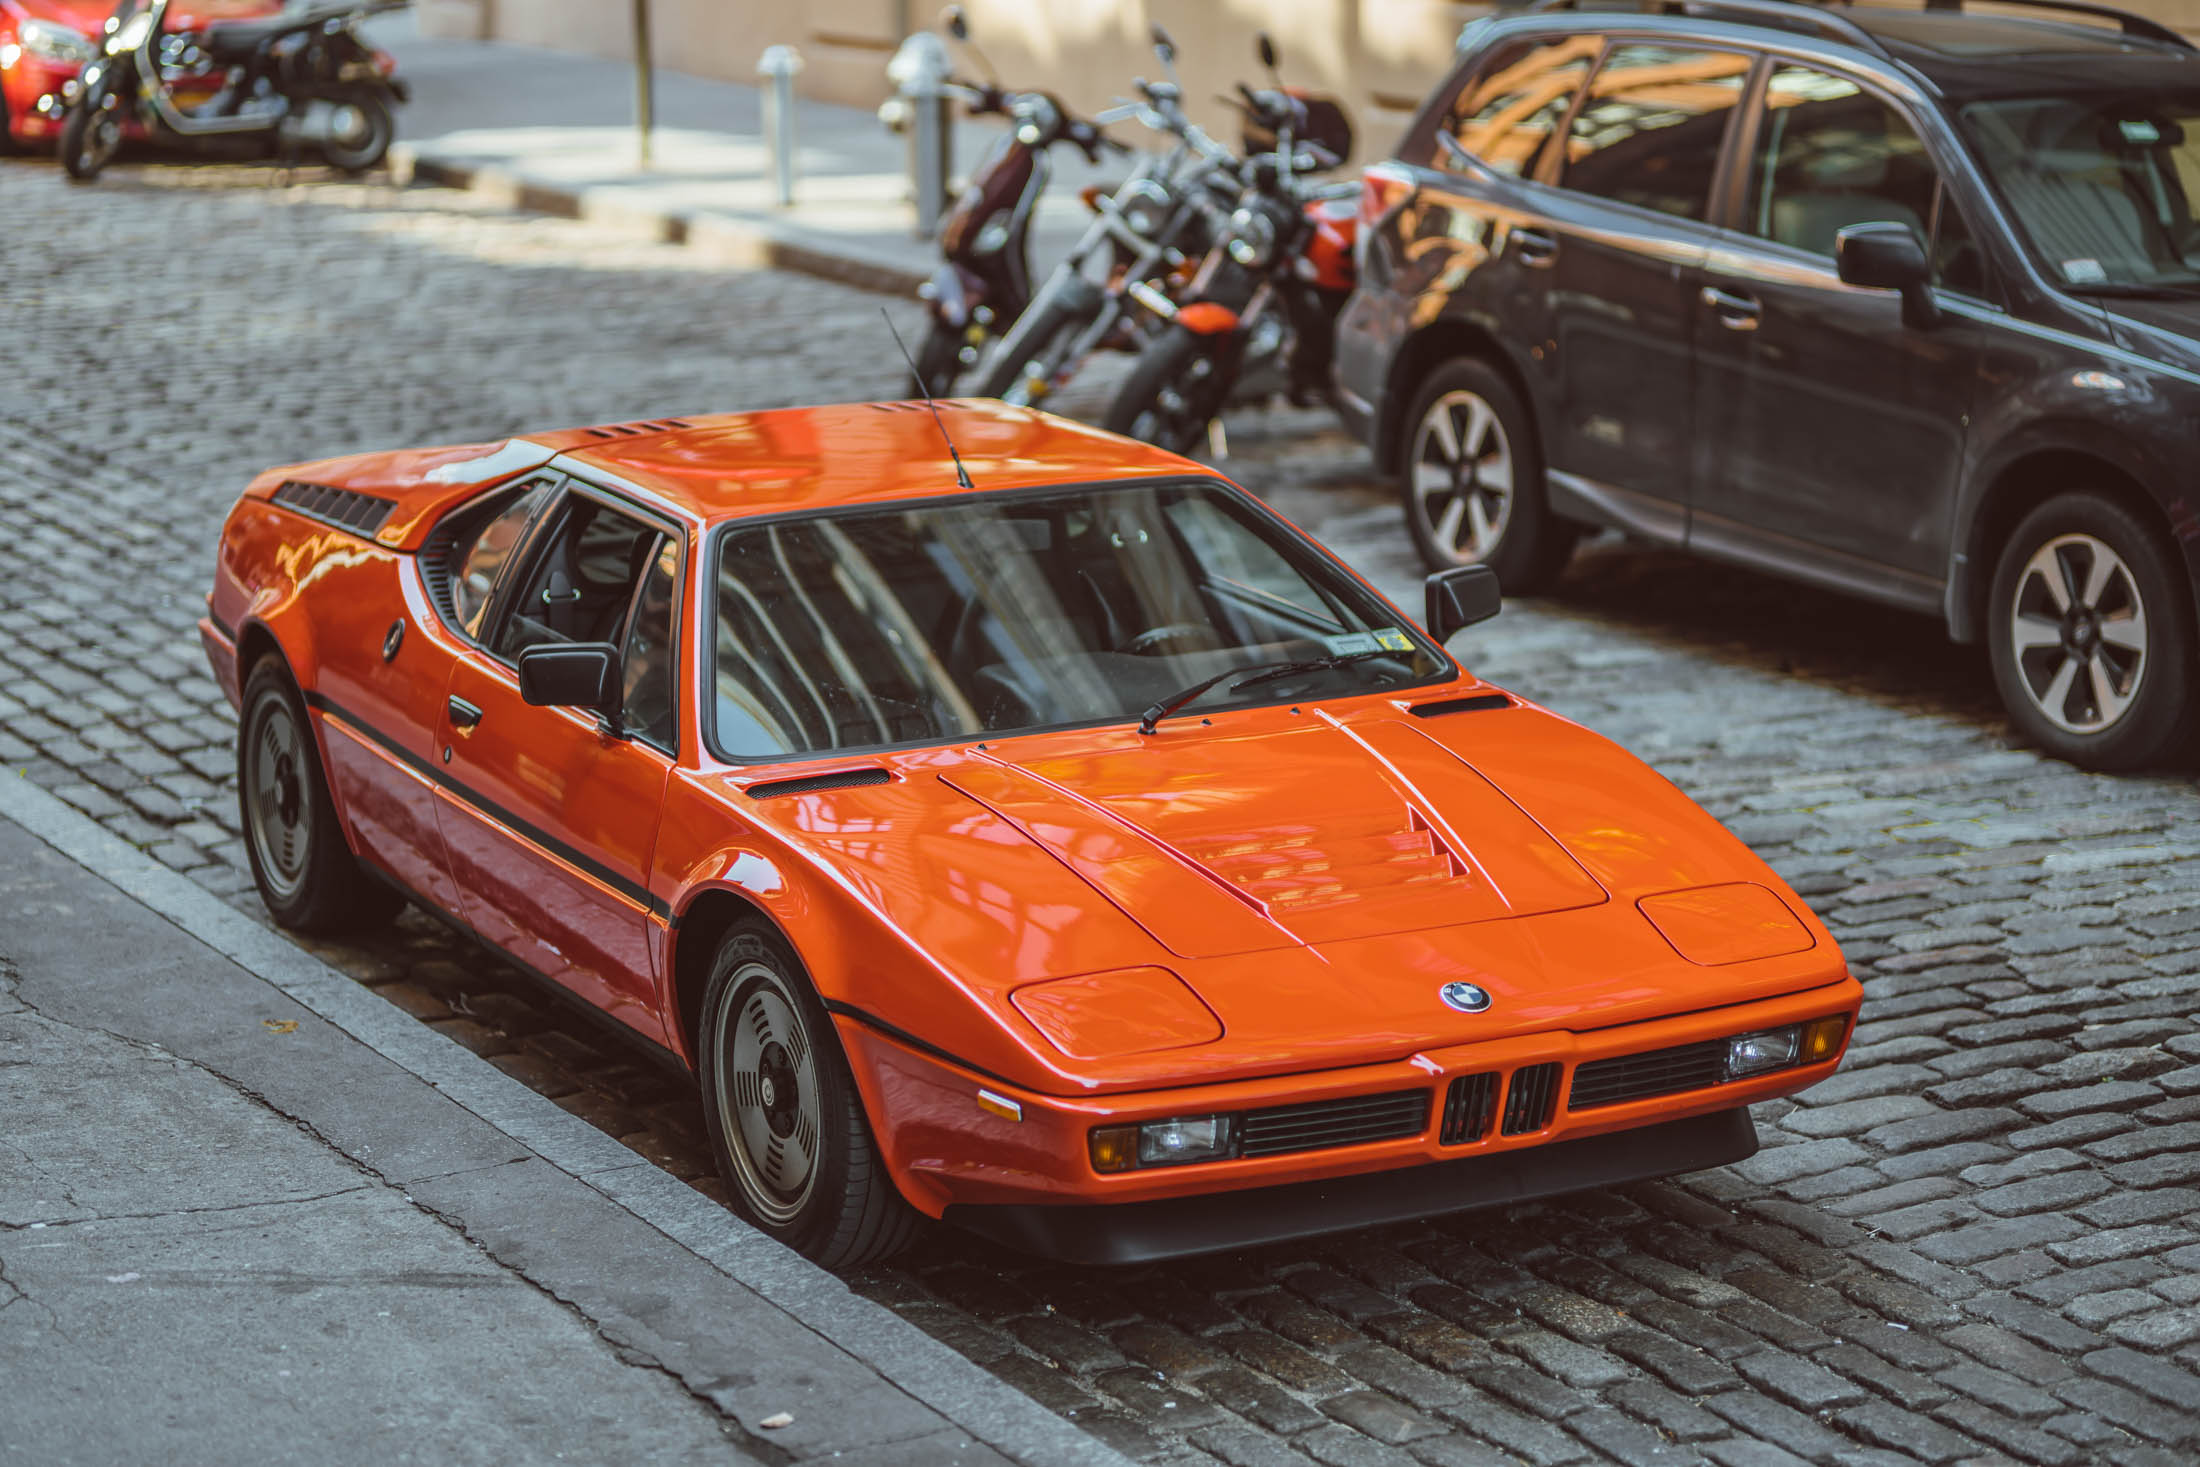 The BMW M1: A Wild, Pricey, Brief Collaboration With Lamborghini - Bloomberg